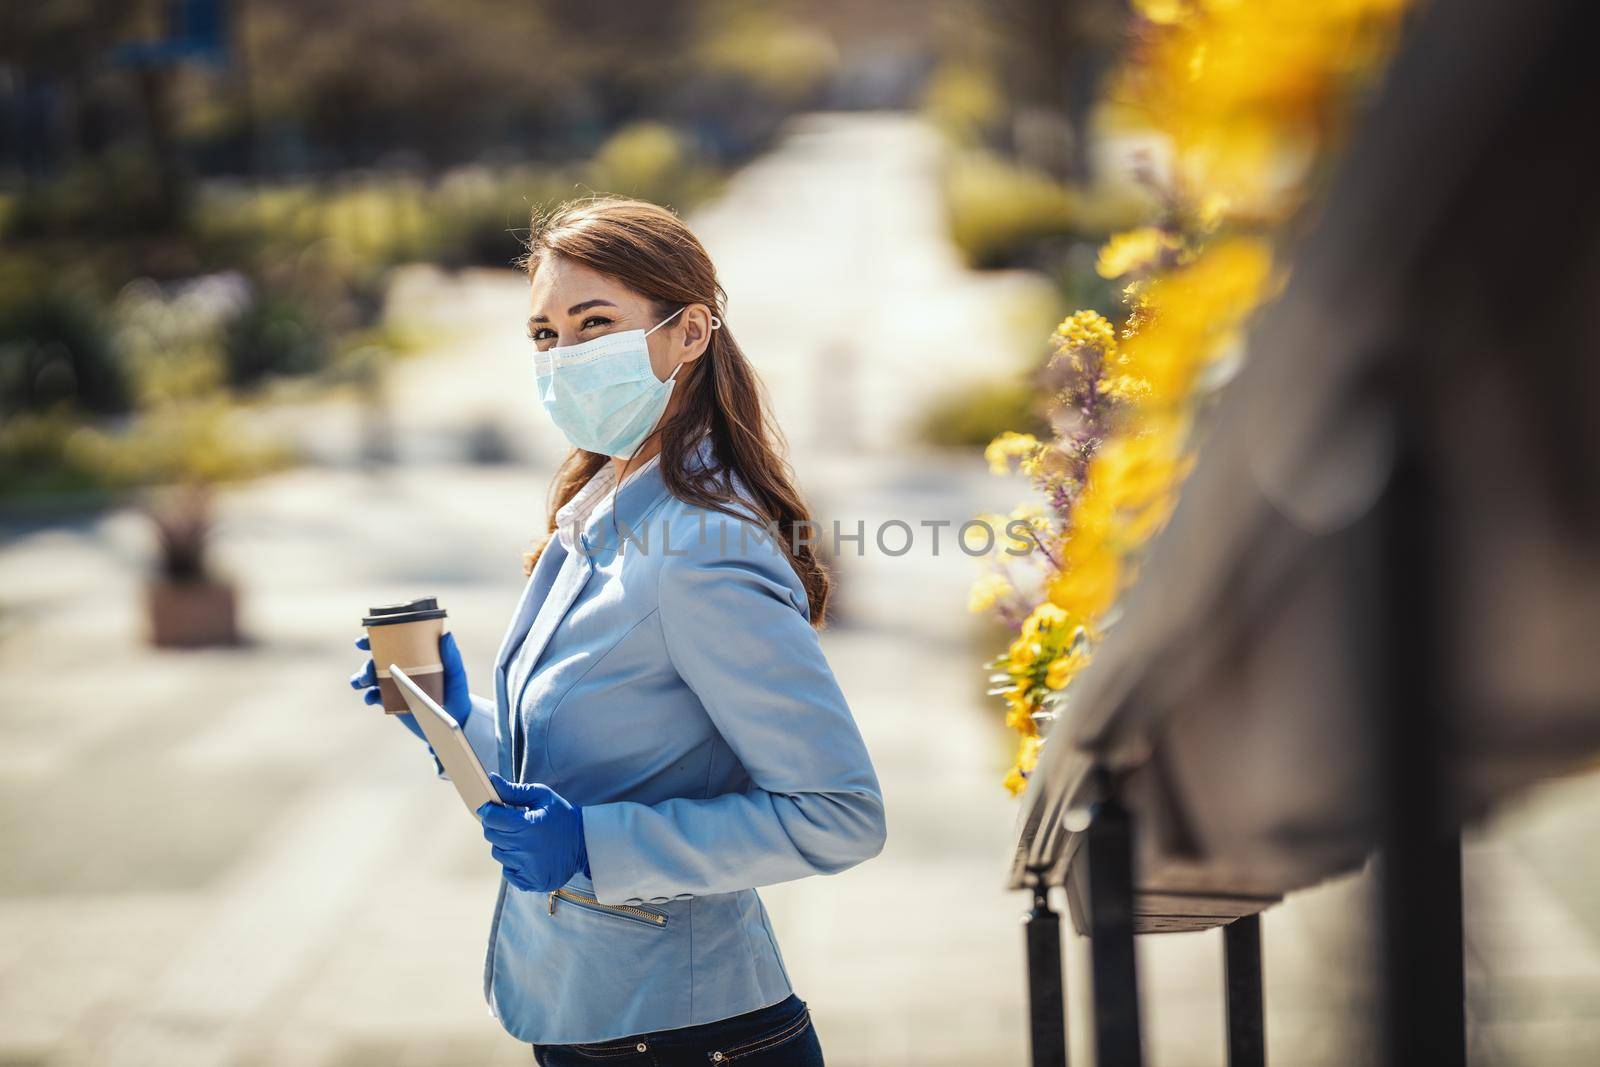 Young business woman with protective mask on her face and digital tablet in her hand is having coffee break outdoors.